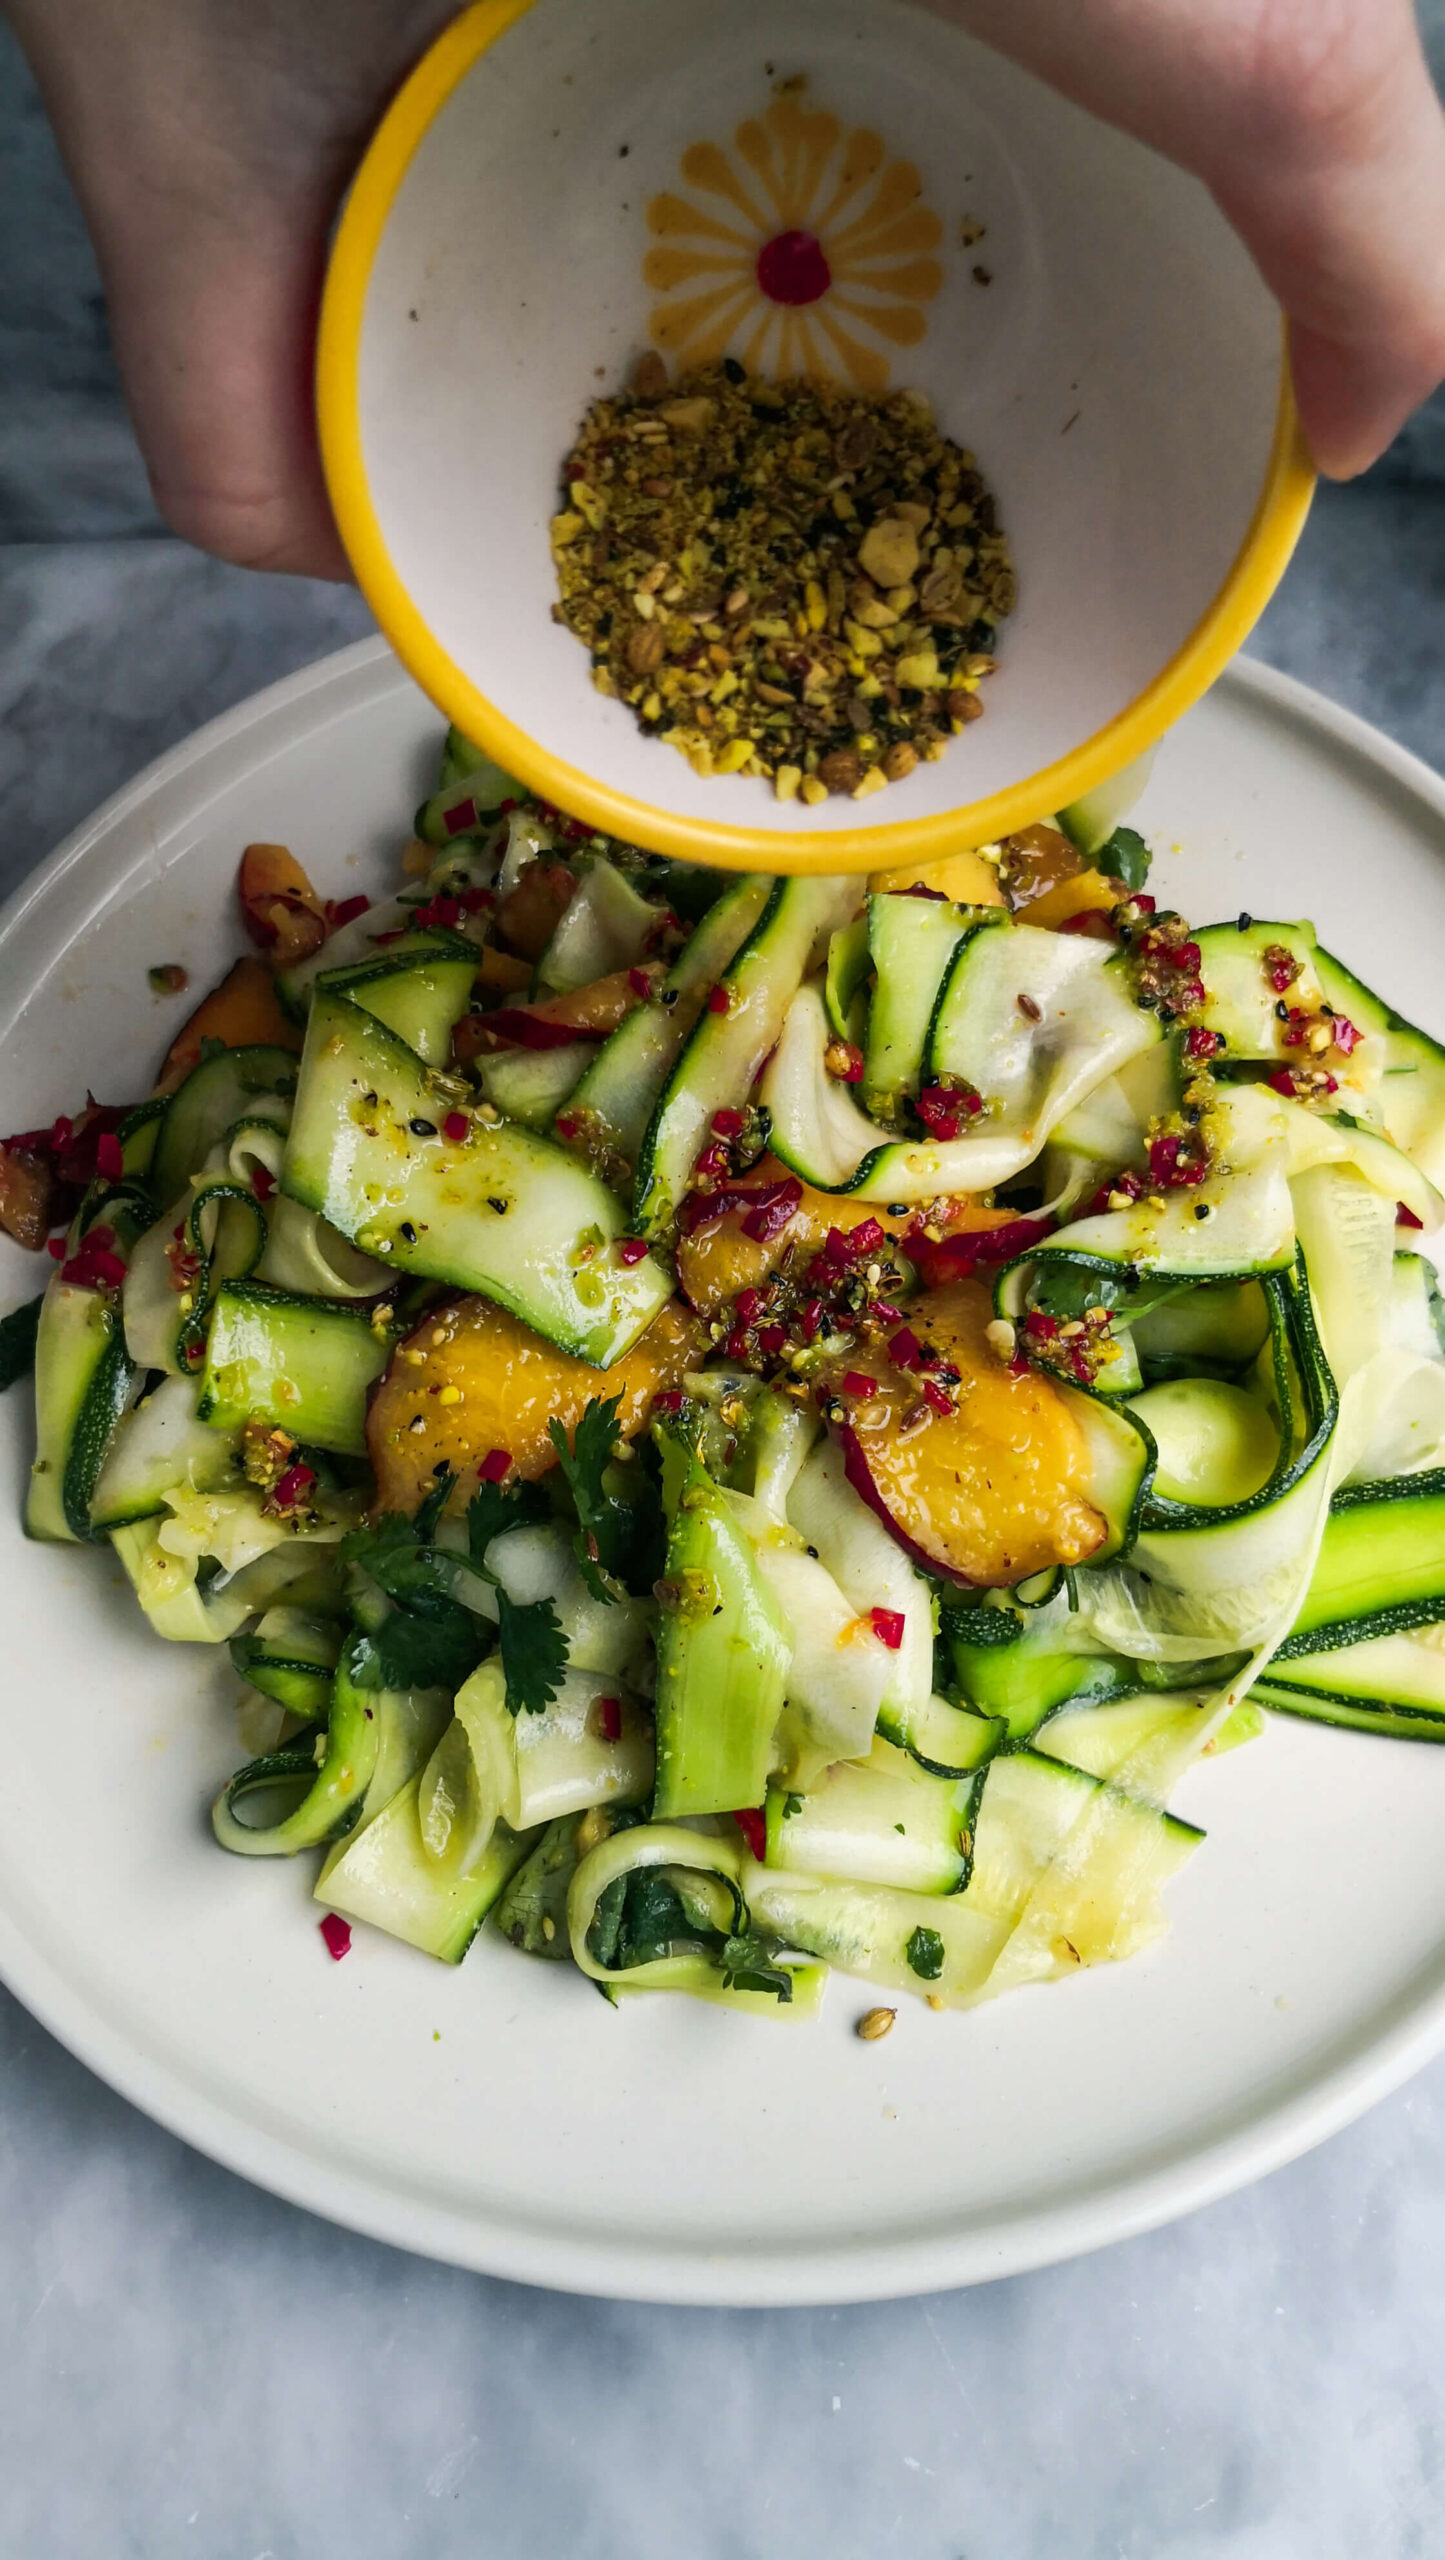 Dukkah being added to raw courgette and peach salad on a white plate.